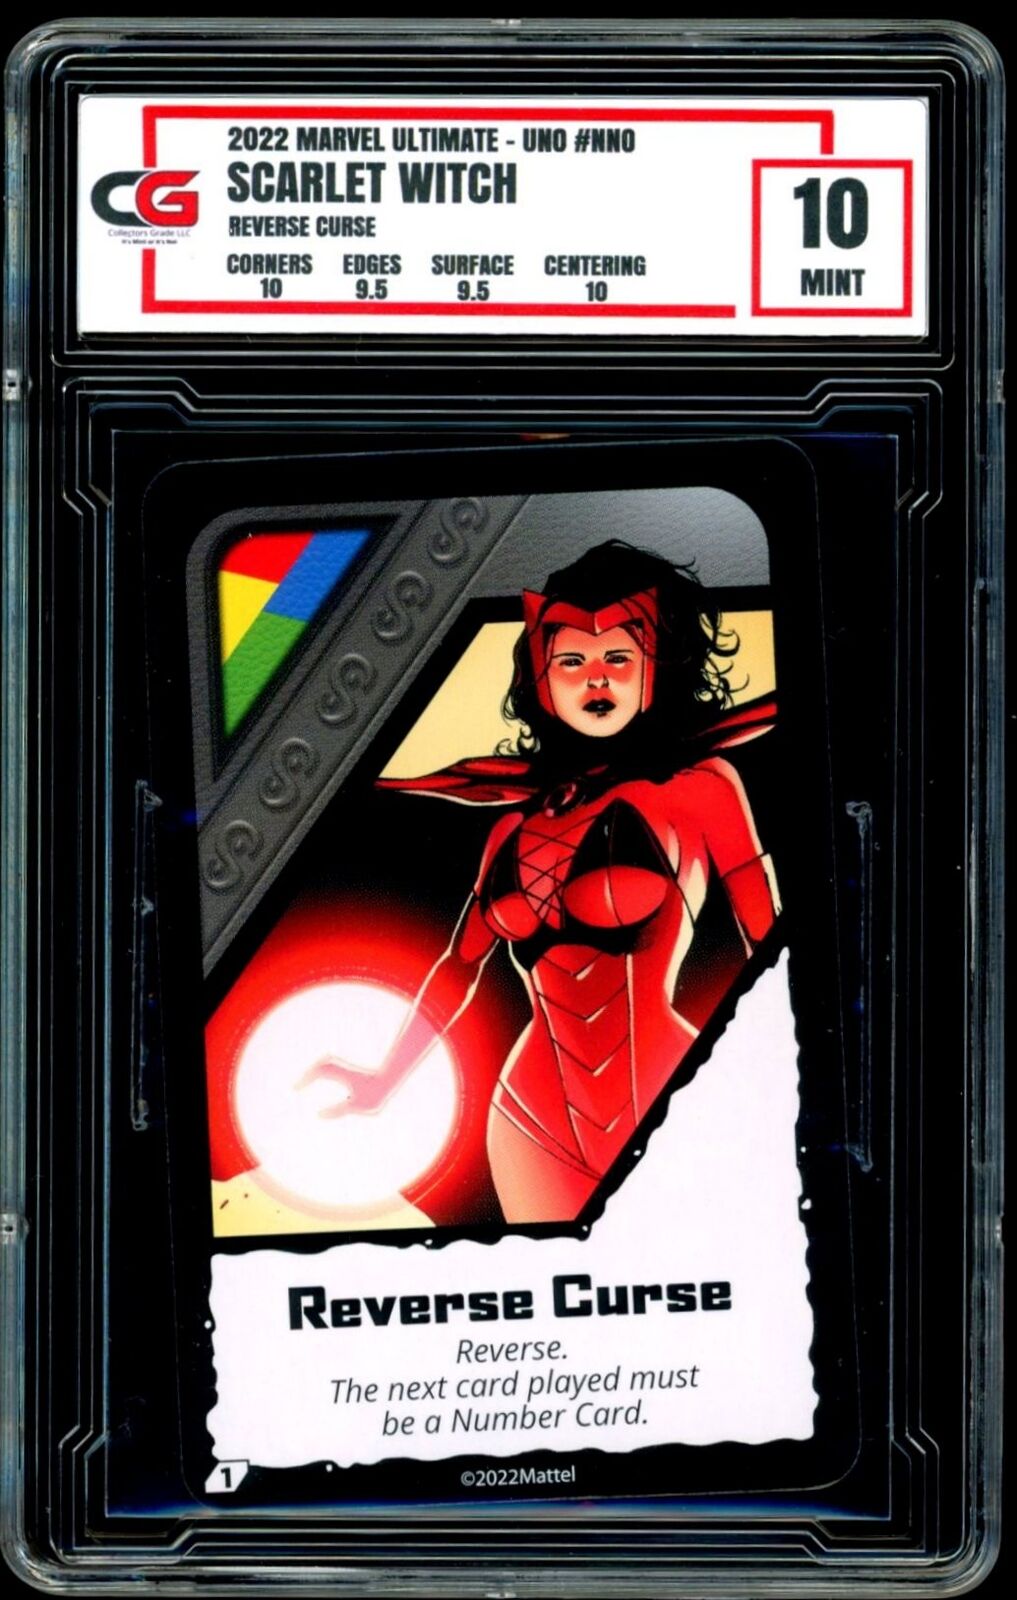 2022 Marvel Ultimate Uno ~ Scarlet Witch Reverse Curse ~ GRADED CG 10